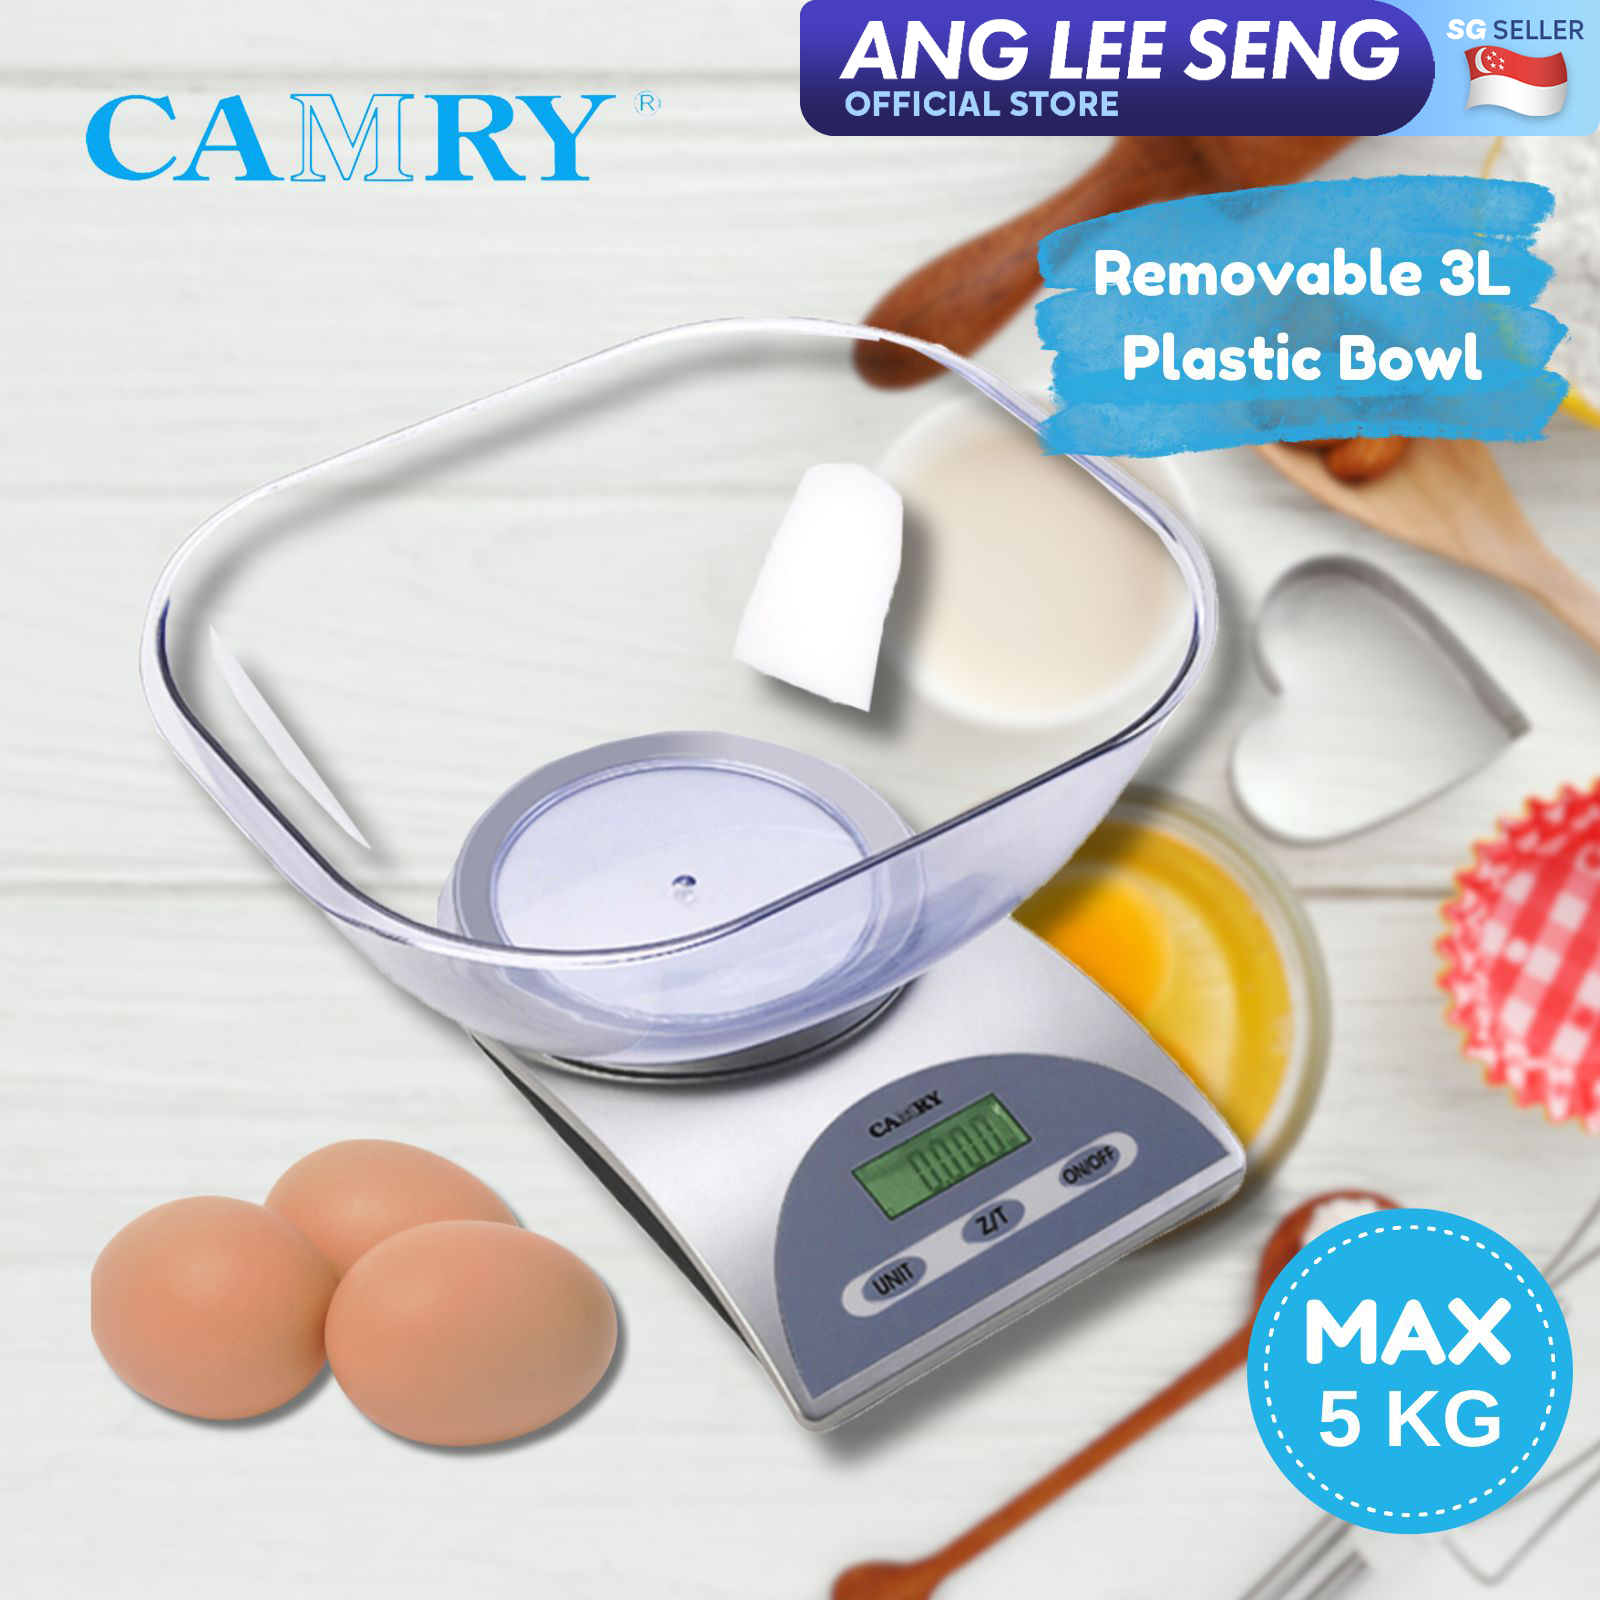 Camry Digital Kitchen Scale 5kg with 3L Removable Bowl